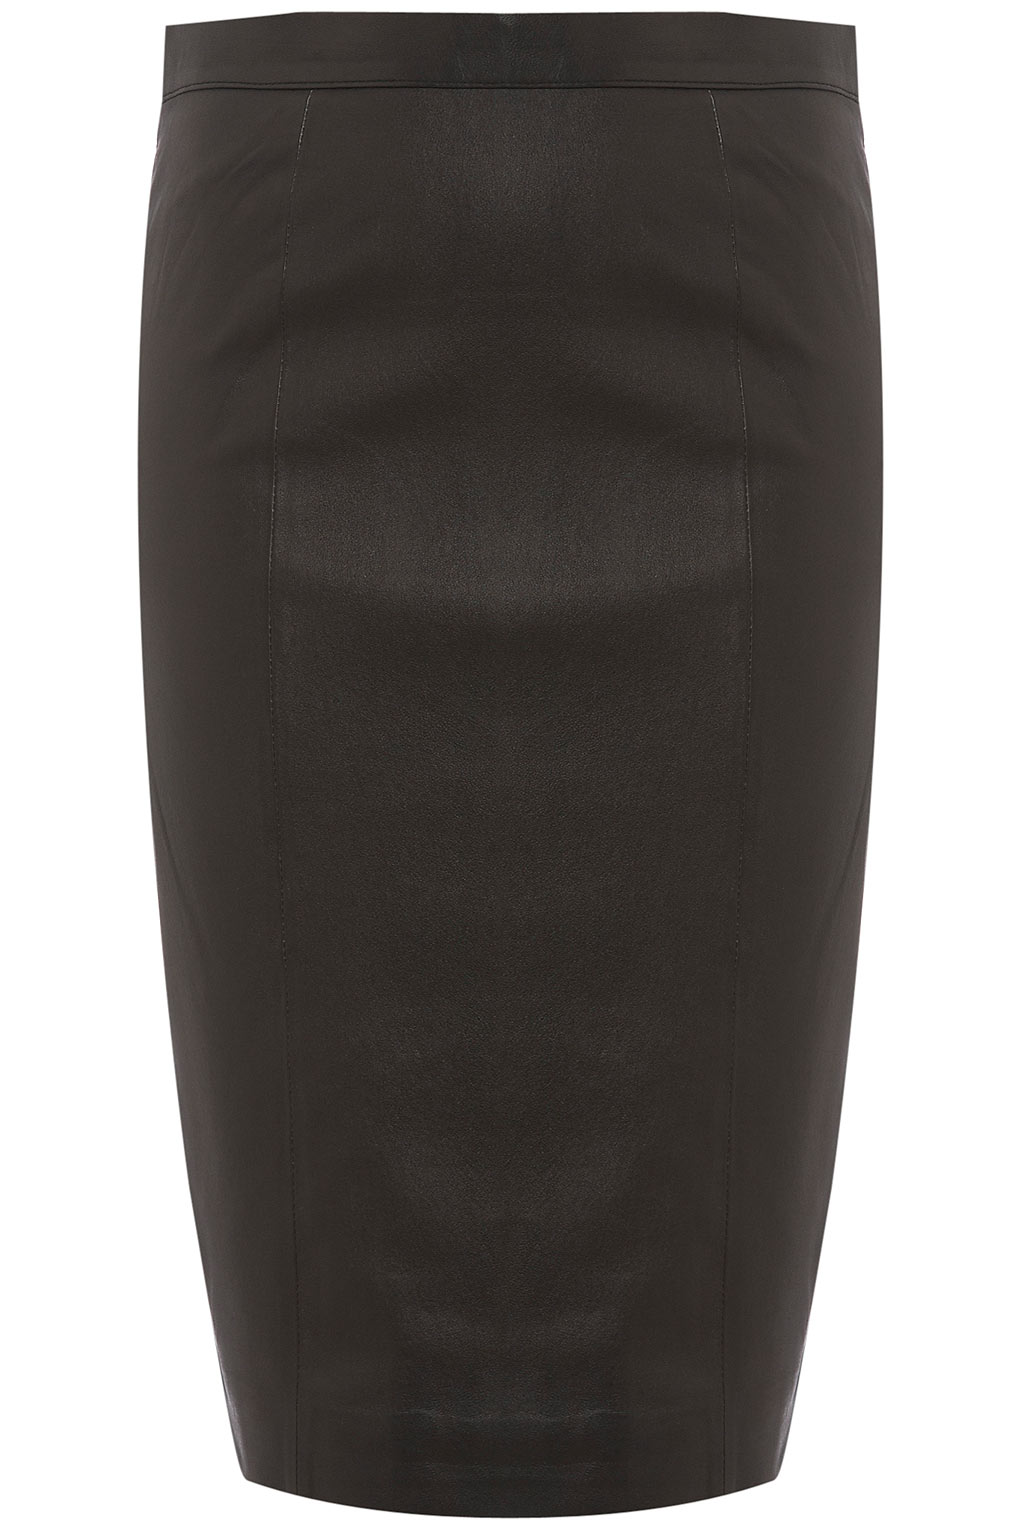 Topshop Leather Pencil Skirt in Black | Lyst